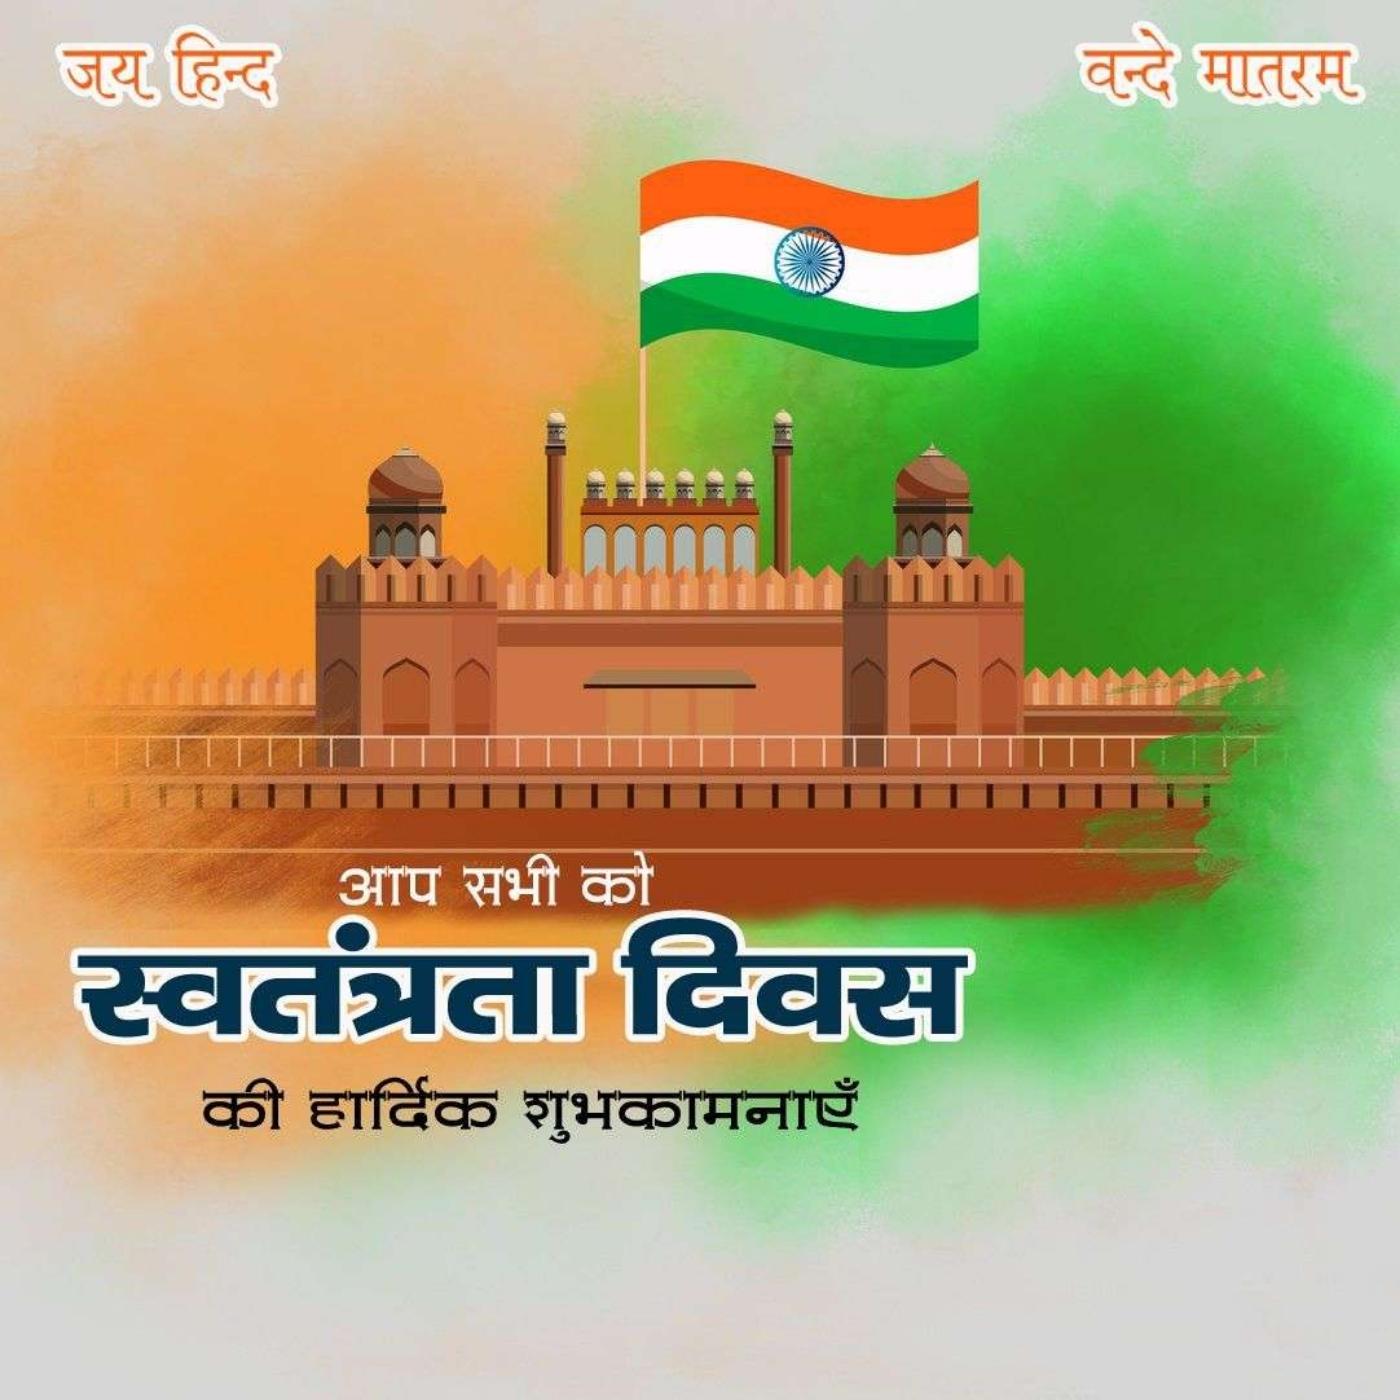 Happy Independence Day Images in Hindi